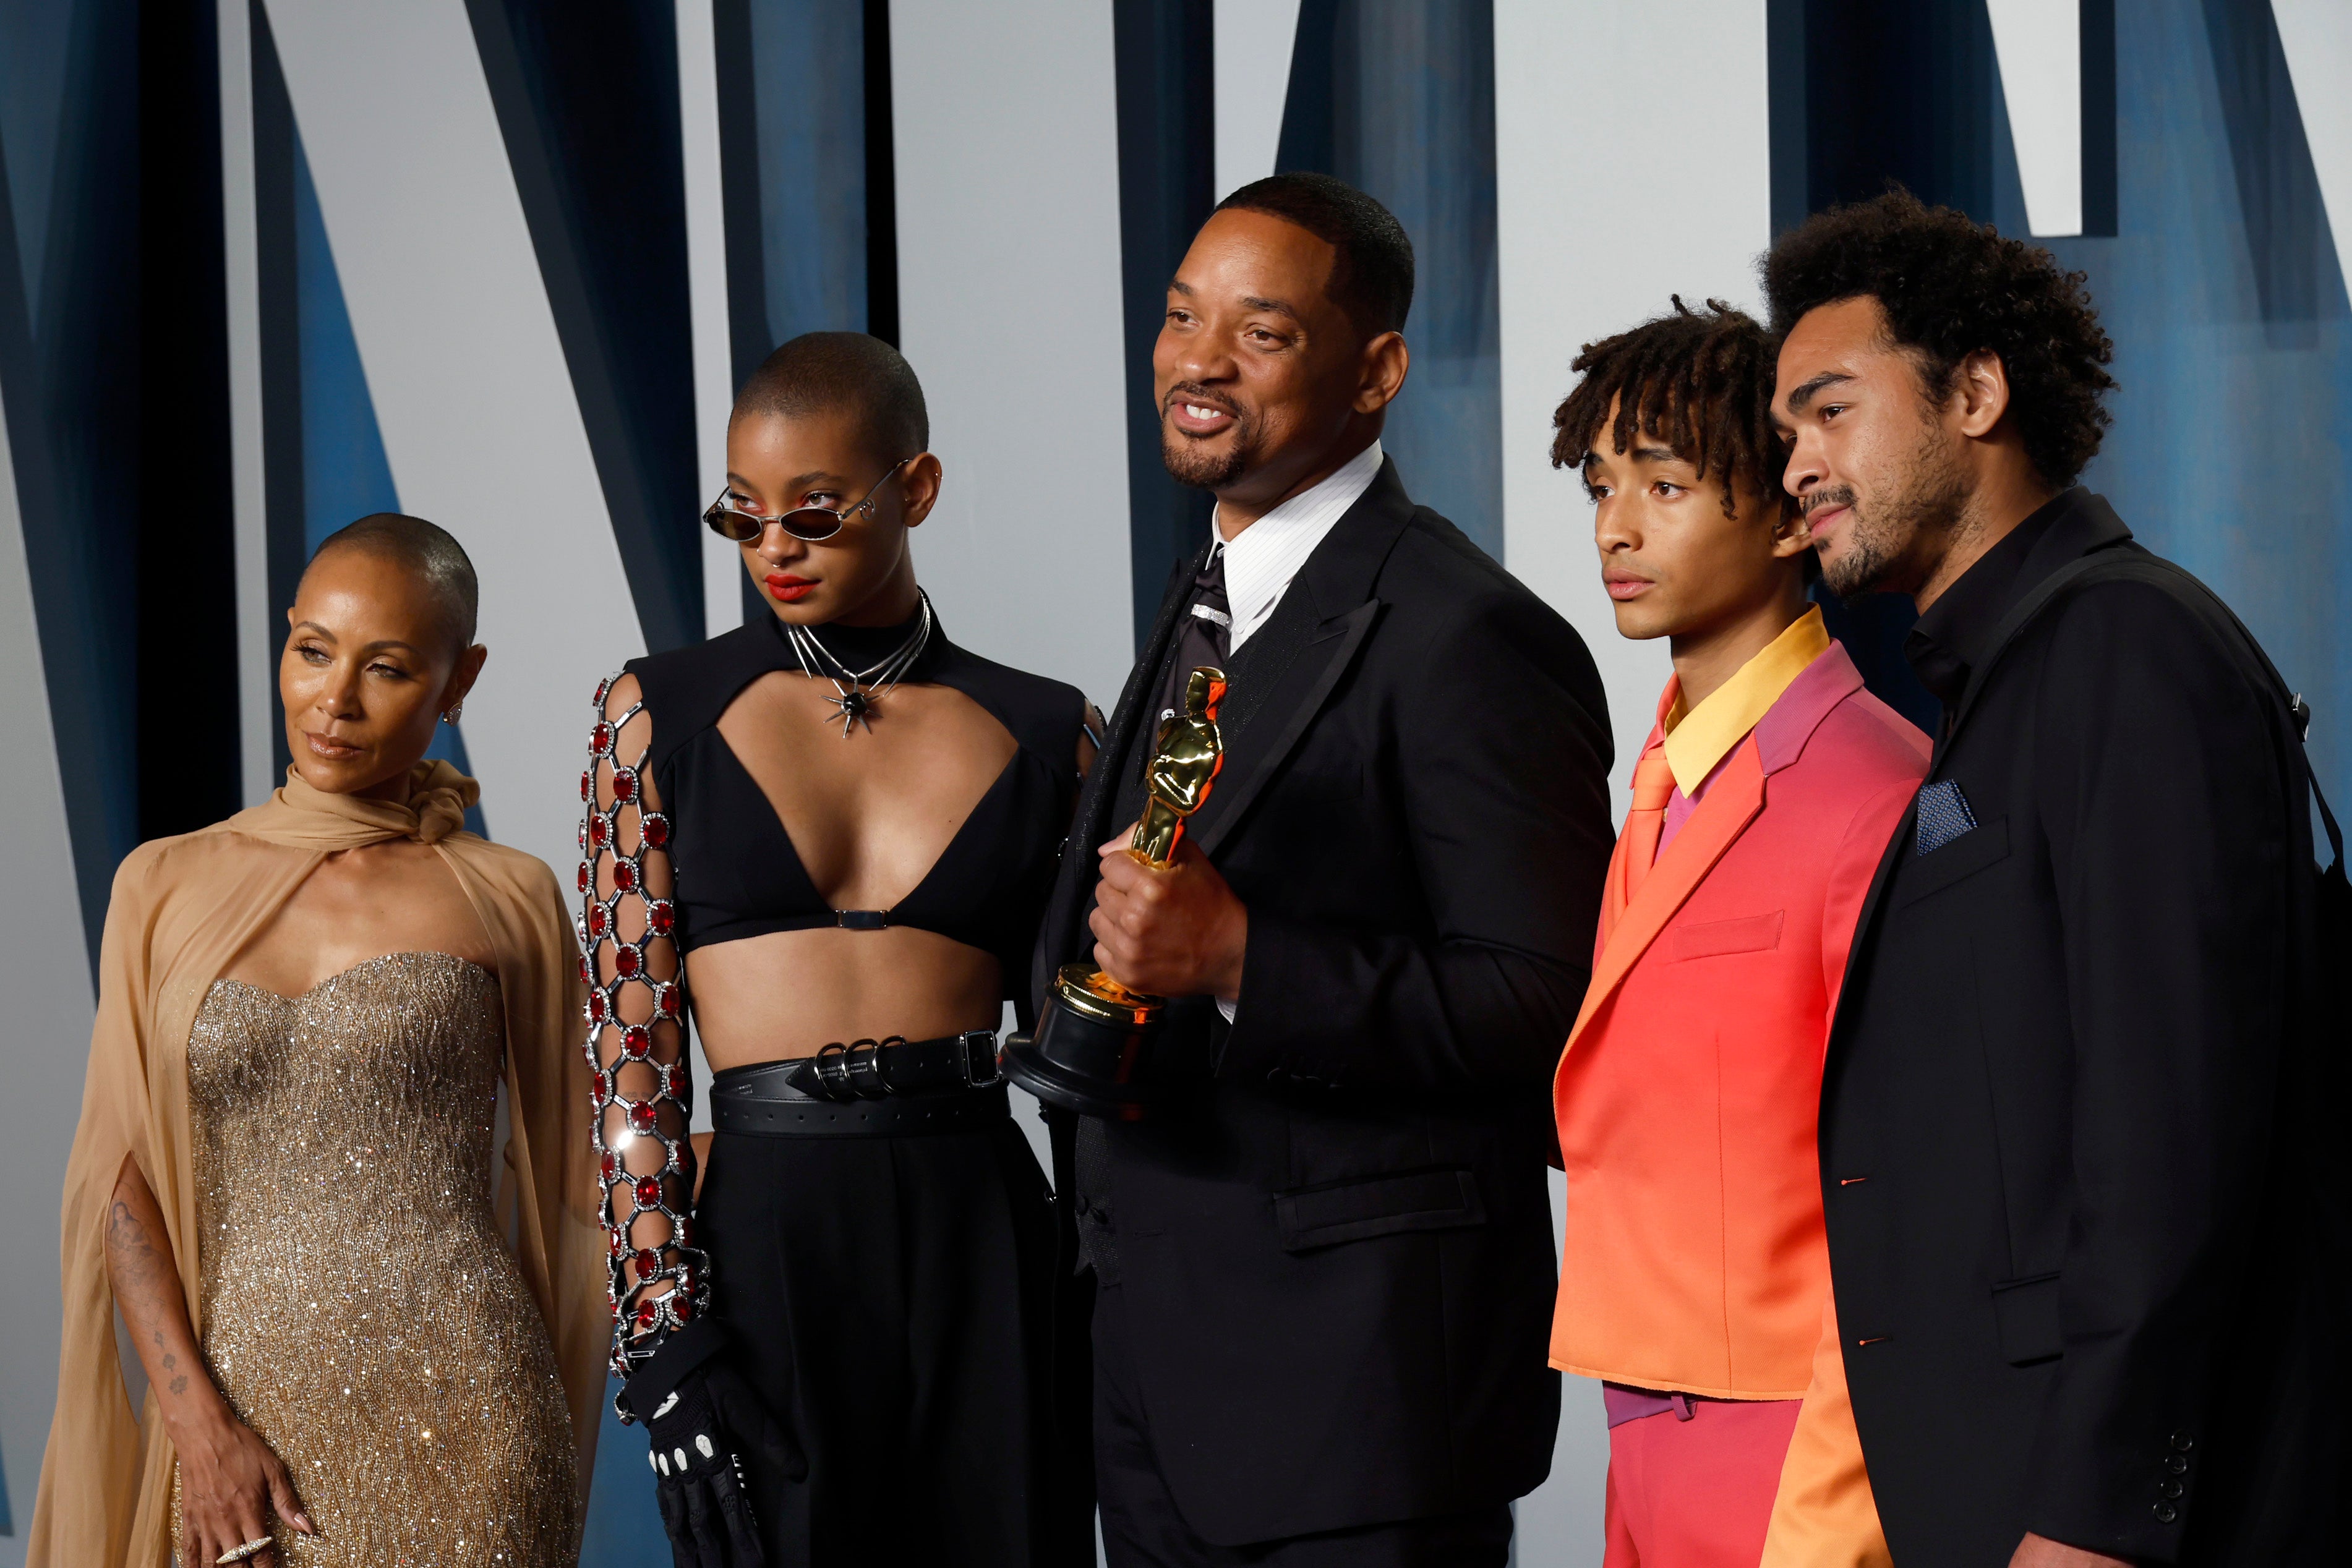 Willow Smith attends Vanity Fair Oscar Party with father Will Smith, mother Jada Pinkett Smith, and brothers Jaden Smith and Trey Smith in March 2022